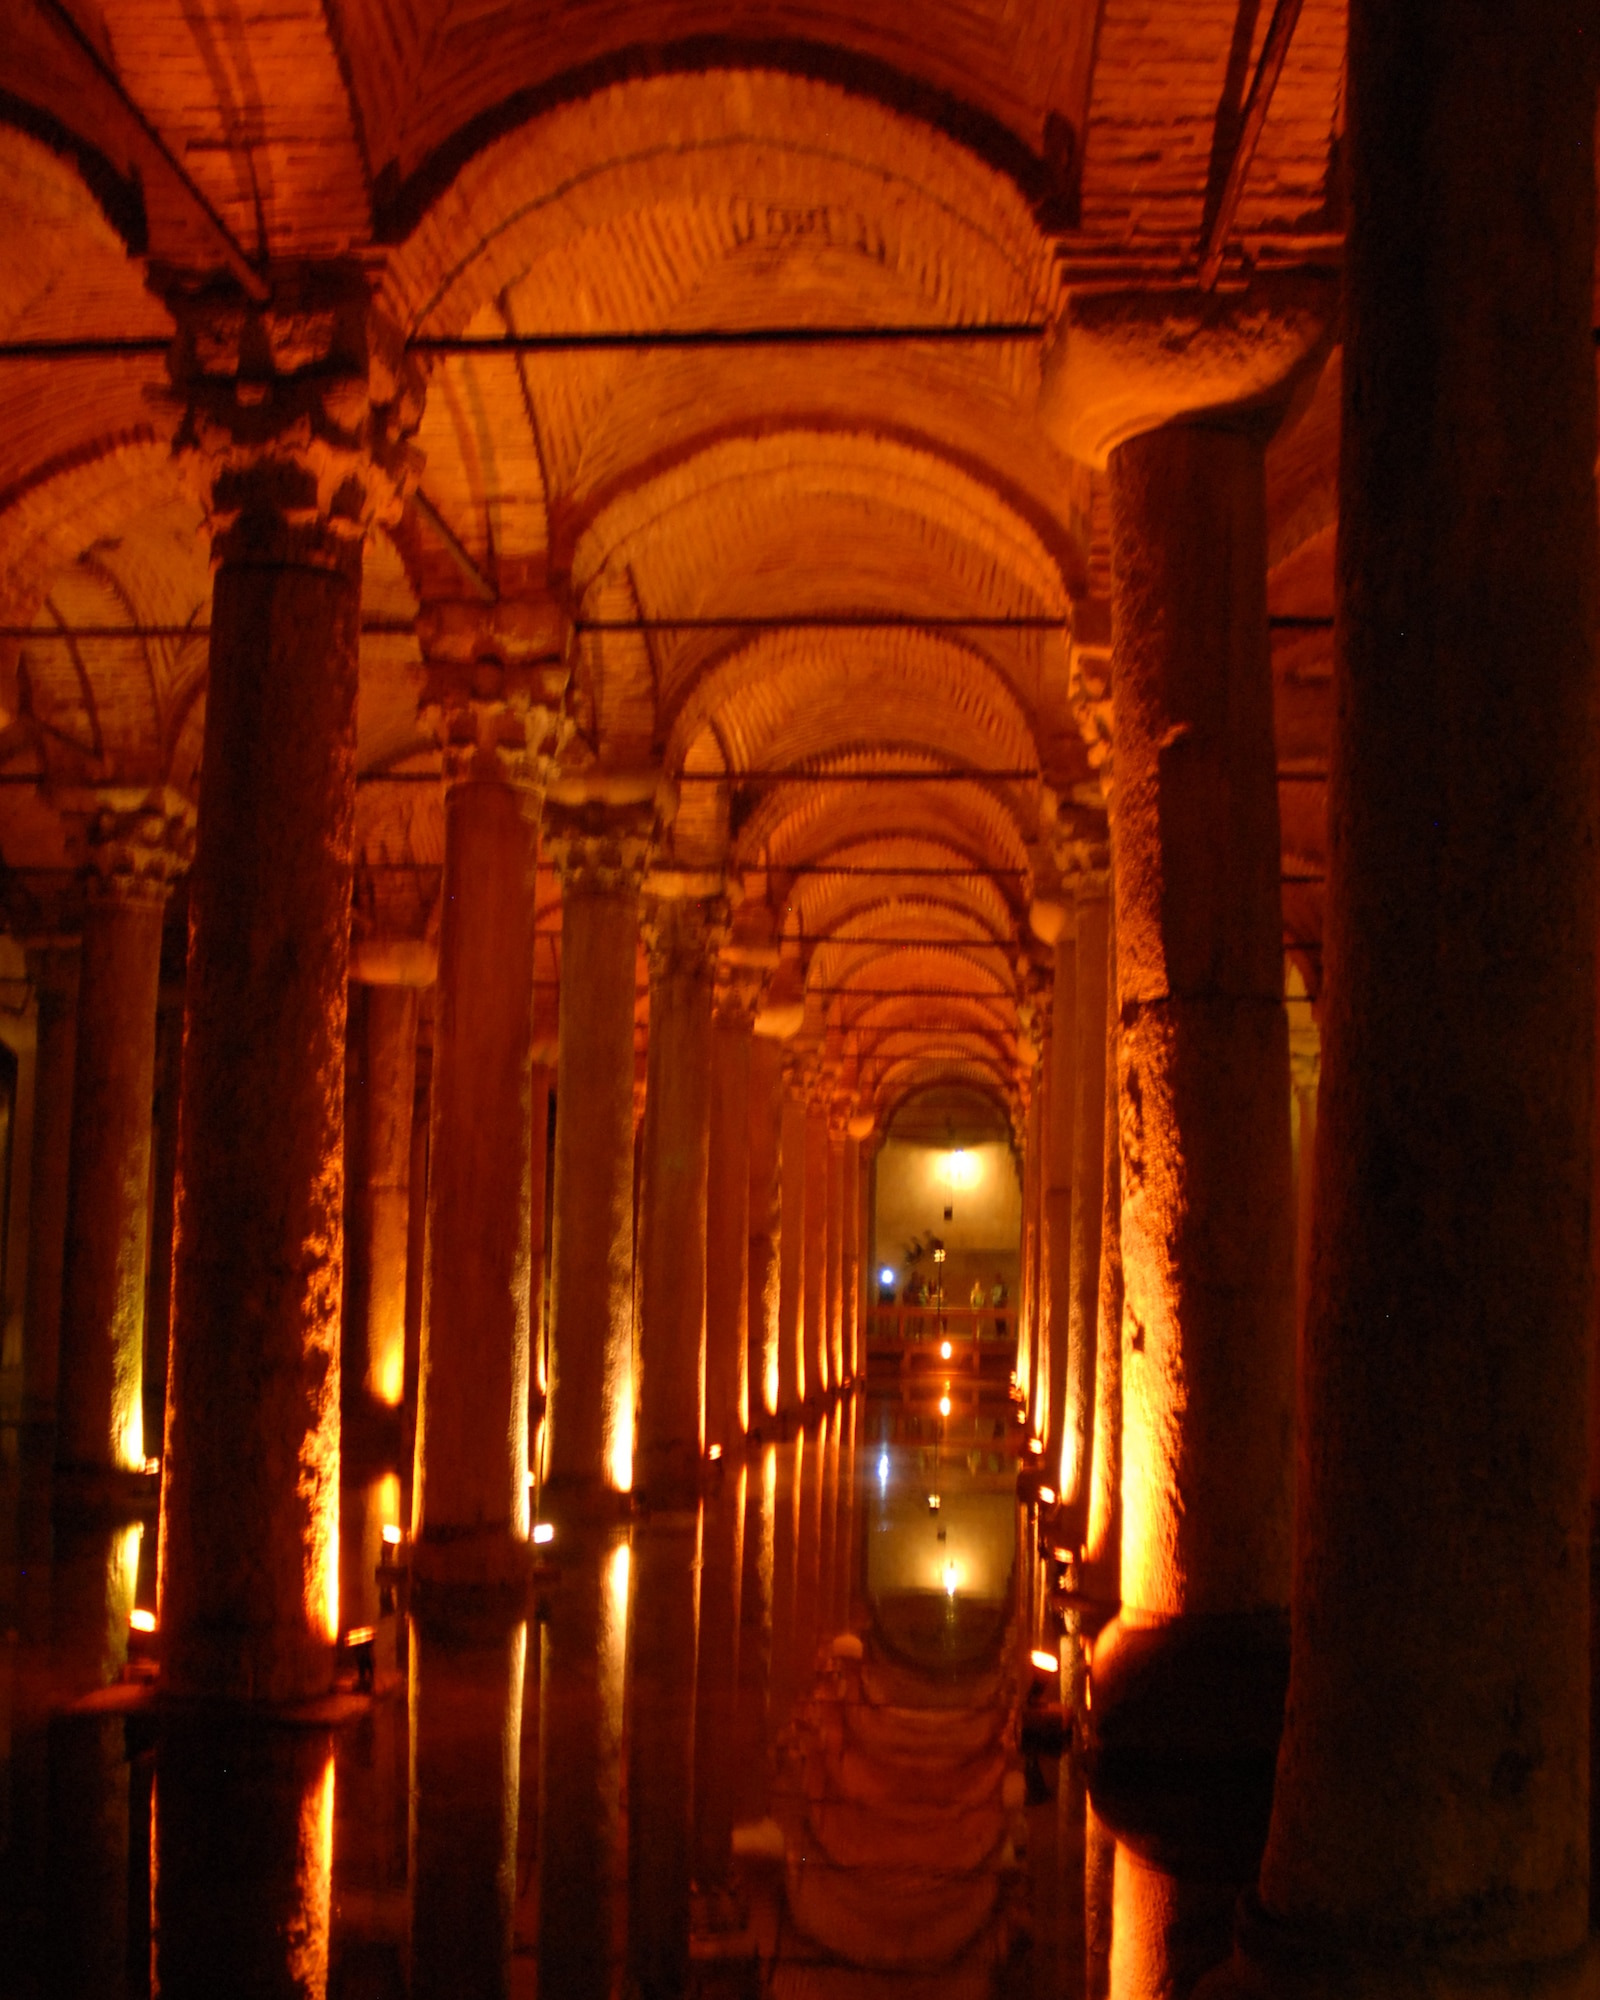 The Basilica Cistern built in 532 AD by Justinian, houses 336 columns throughout the 65 meter wide and 143 meter long  room, Istanbul Turkey.  The cistern at one time housed 80,000 cubic meters of water which could be pumped or delivered through aqueducts. Two columns feature the head of Medusa and swimming throughout the water are hundreds of carp. (U.S. Air Force photo/Staff Sgt. Lauren Padden)
